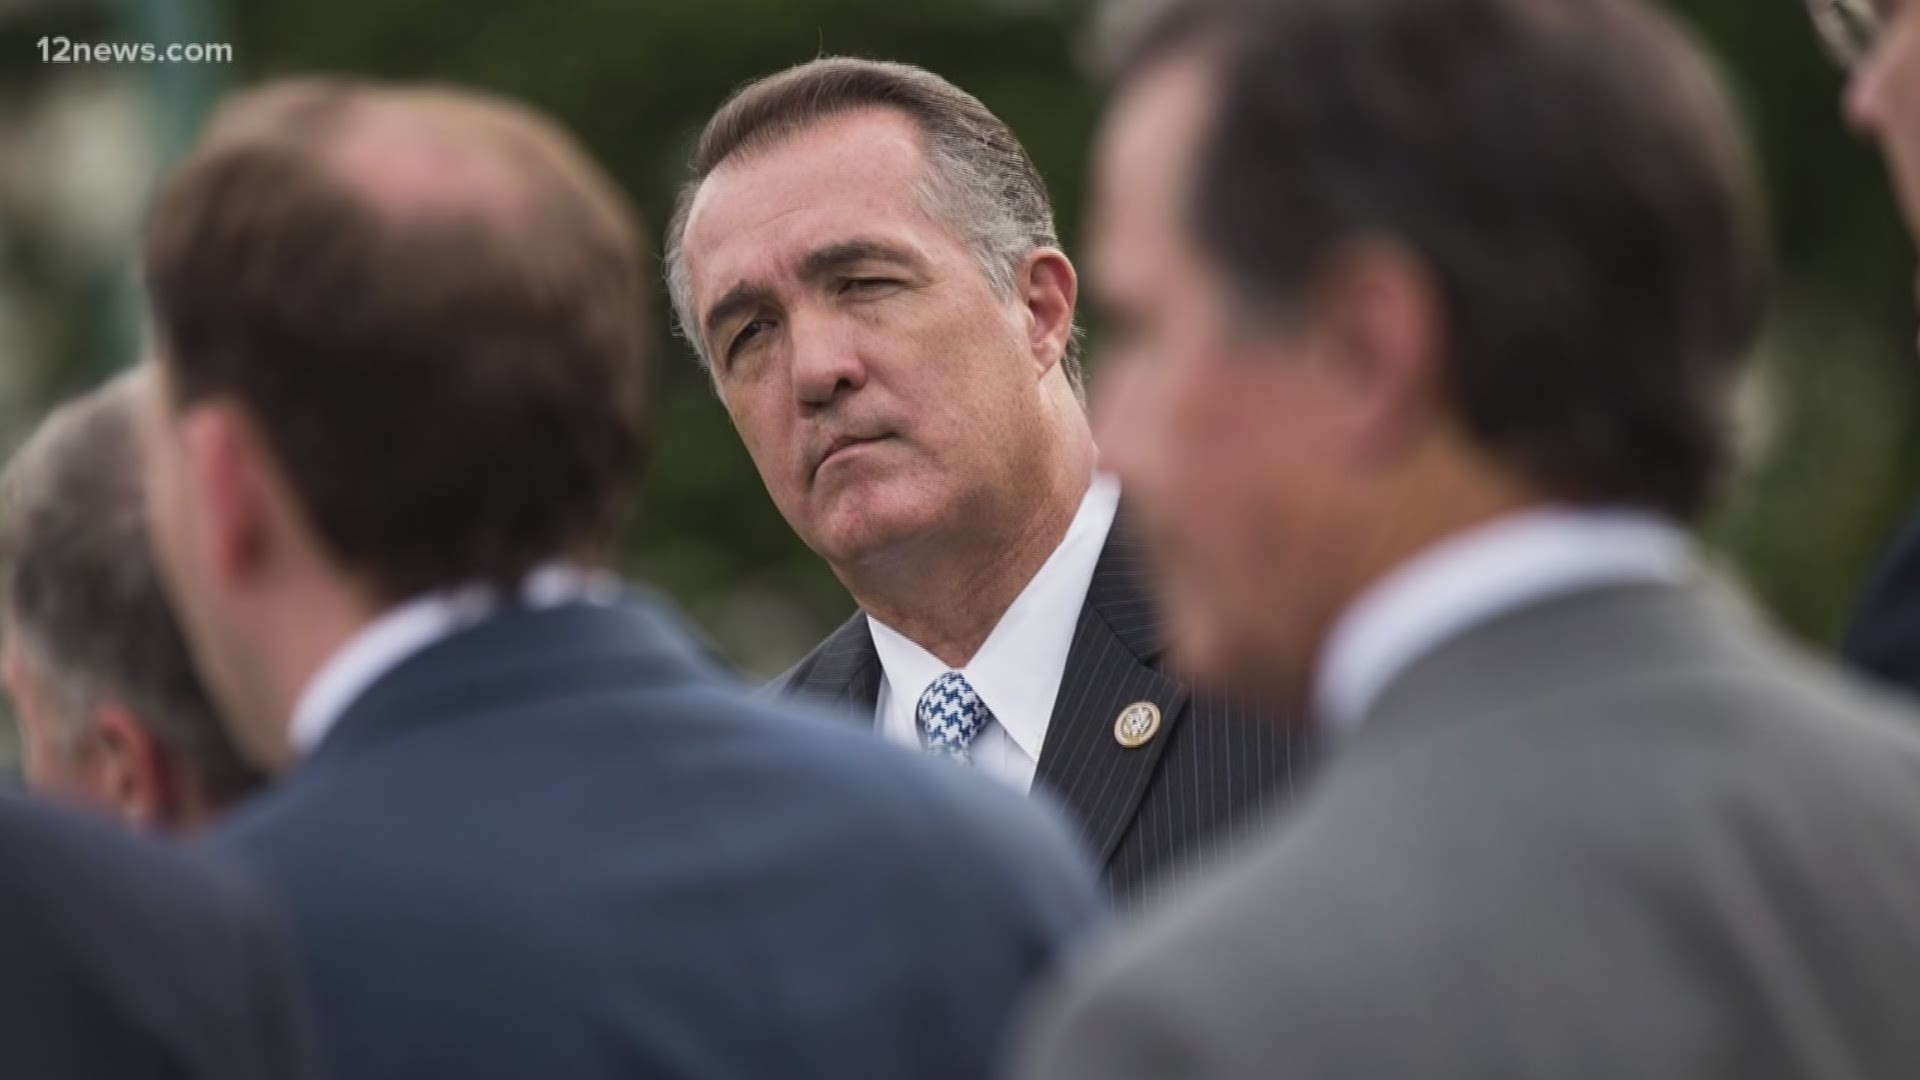 Arizona congressman Trent Franks announced he will resign from office Jan. 31, 2018 after the House Ethics Committee opened an investigation into sexual harassment allegations.